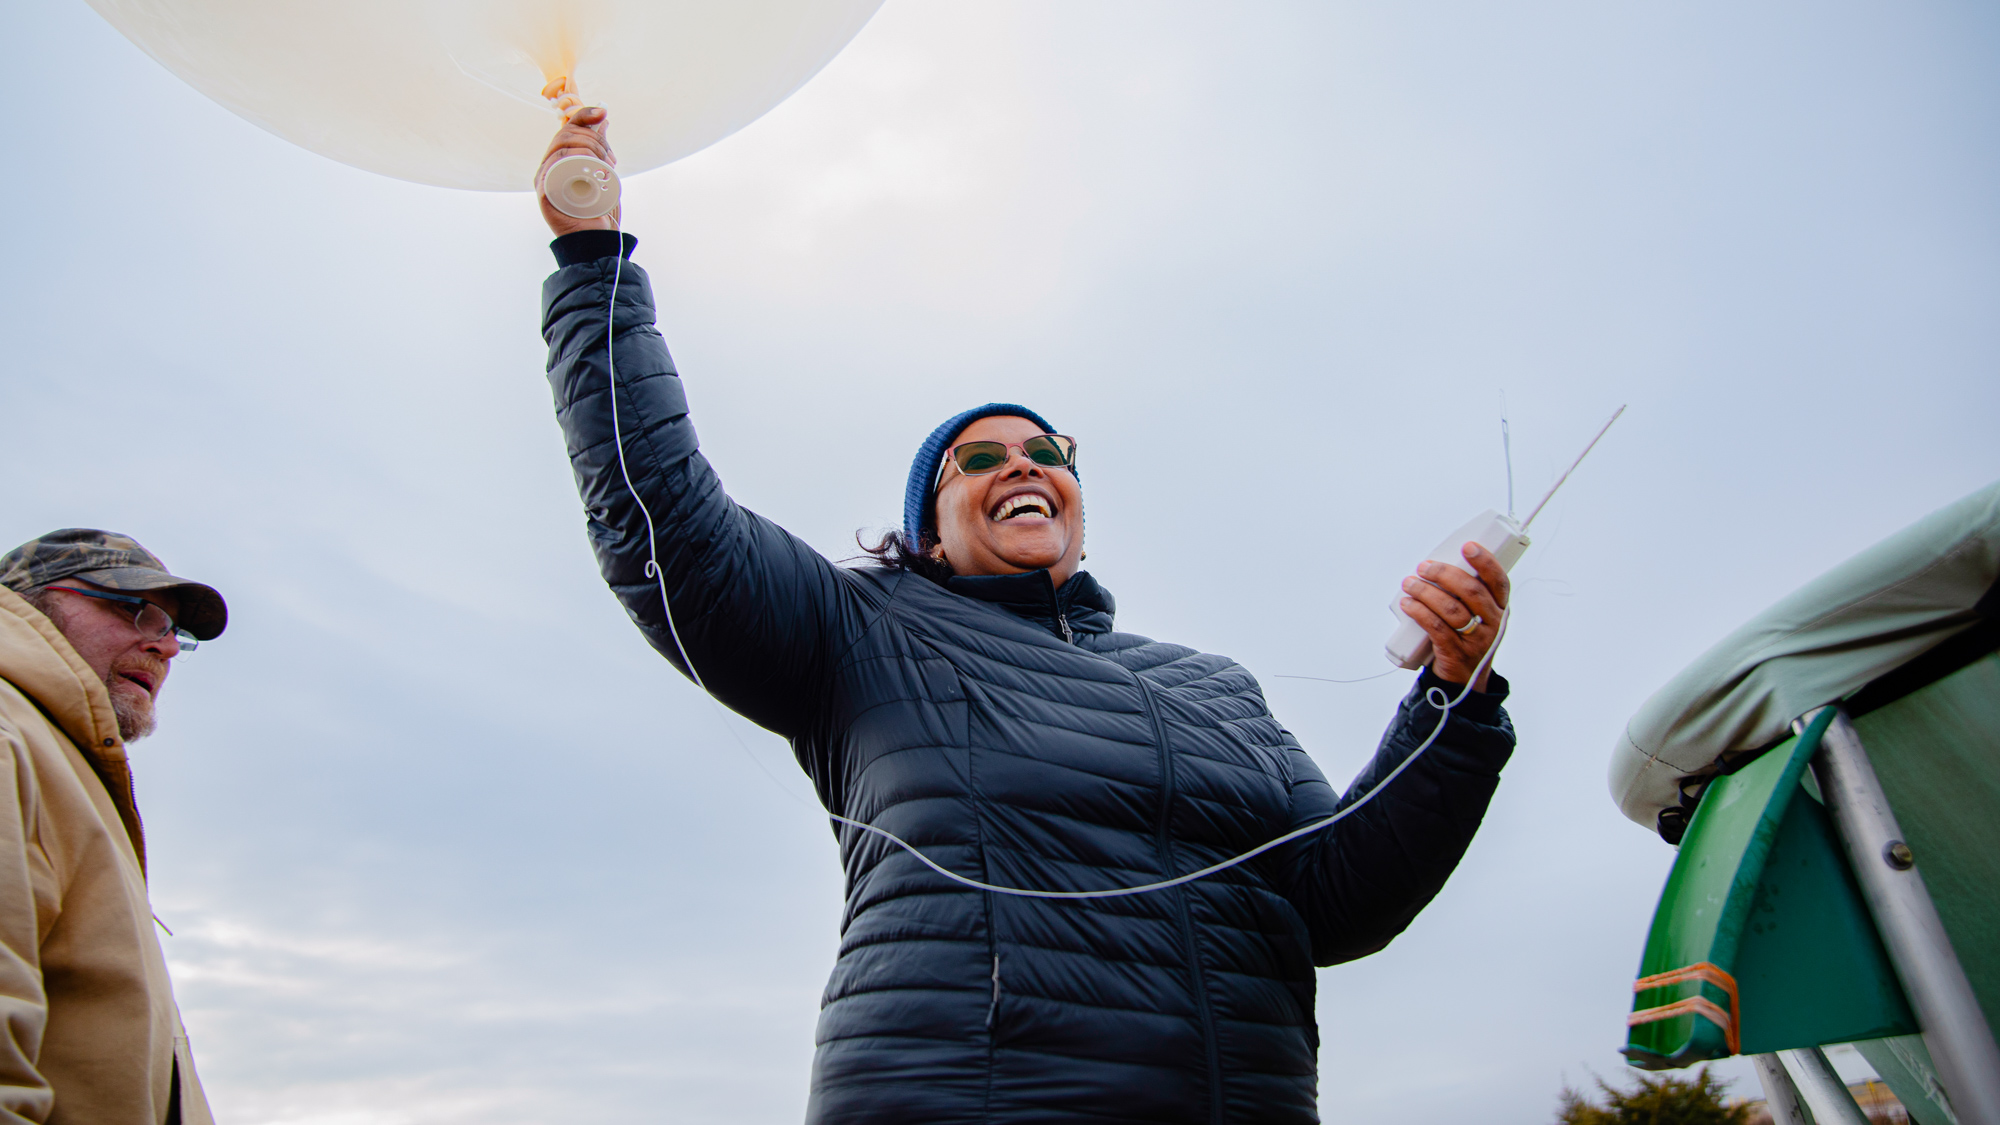 DOE Office of Science Director Asmeret Asefaw Berhe holds onto a large weather balloon.